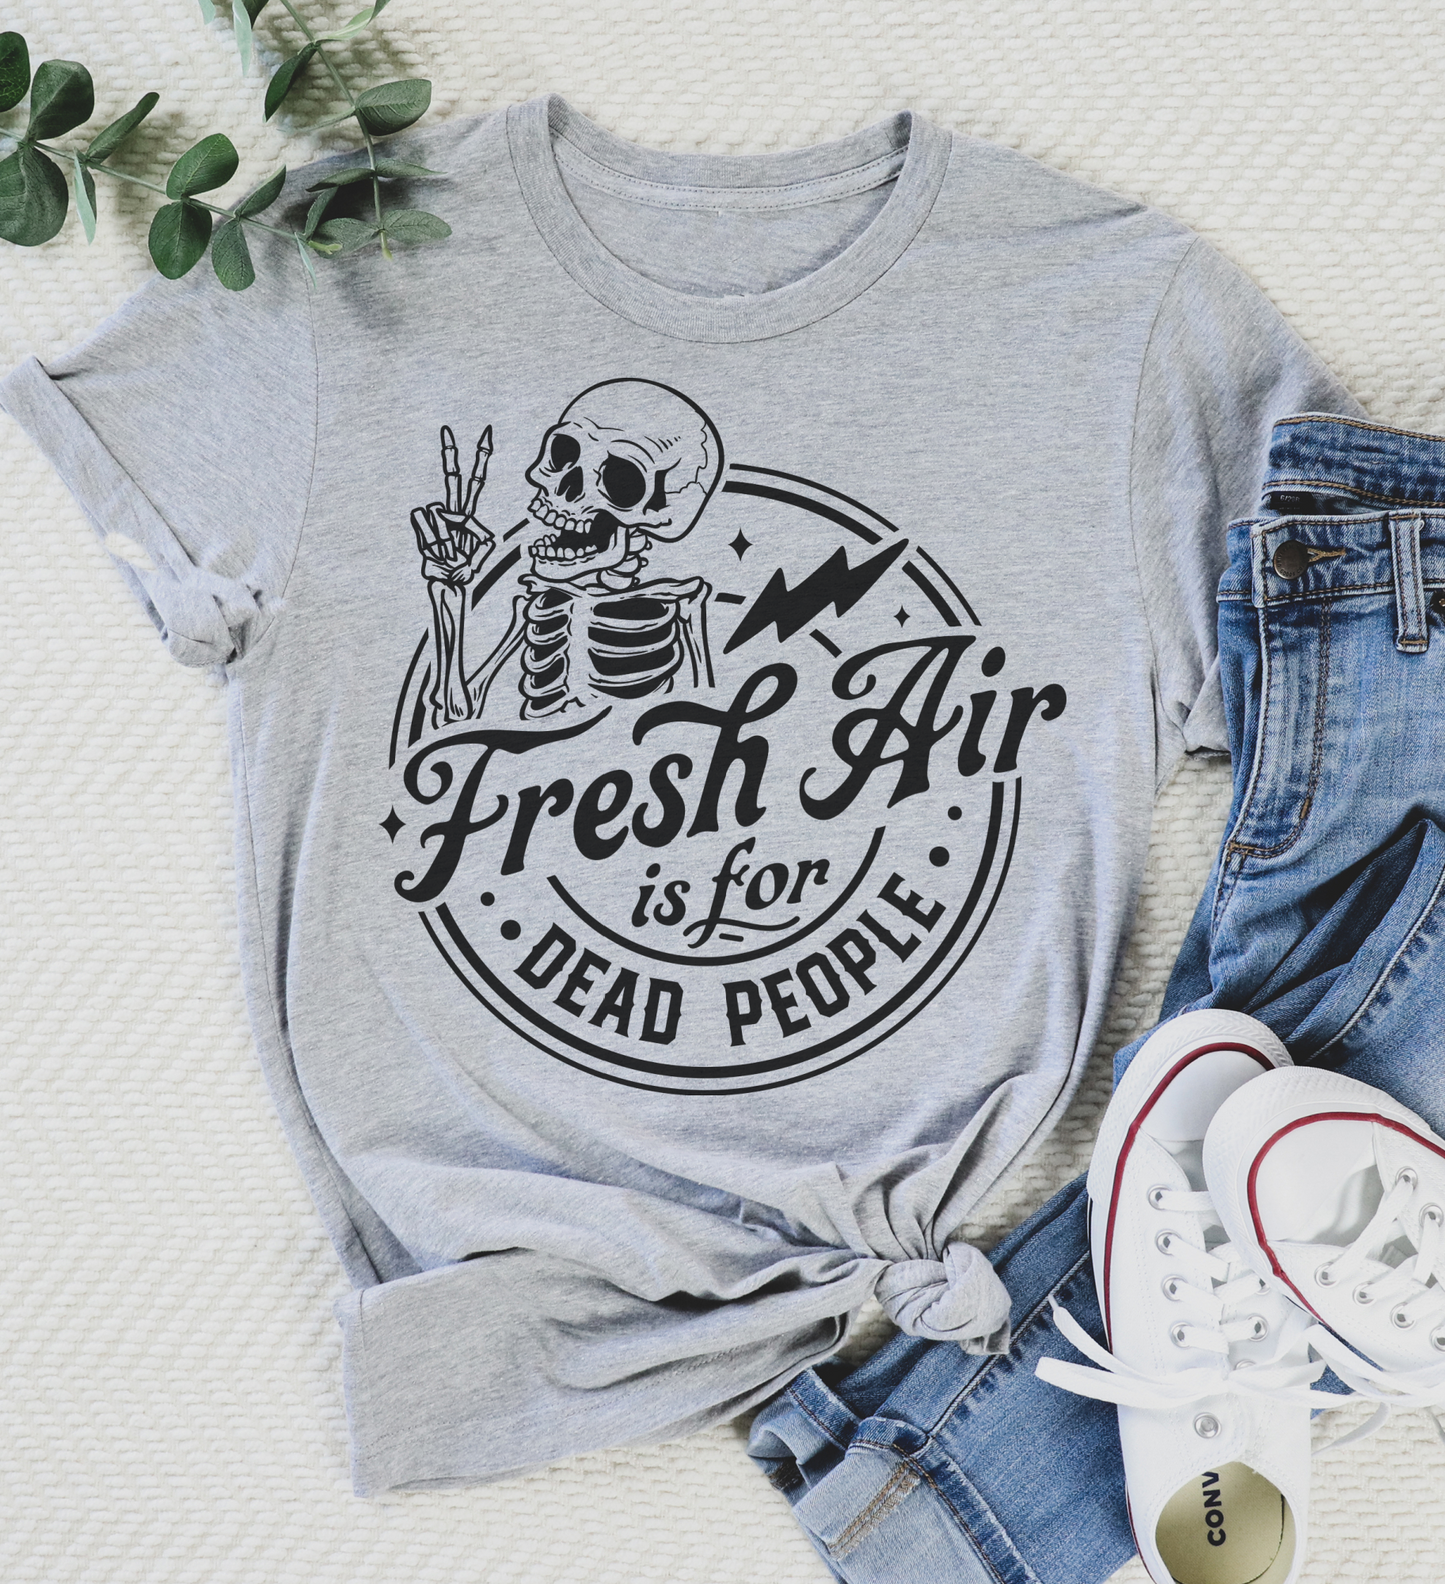 Fresh Air is for Dead People T-Shirt Funny Sarcastic Tshirt Funny Sarcasm Tee Fun Hilarious Shirt Adult Small thru XXLarge